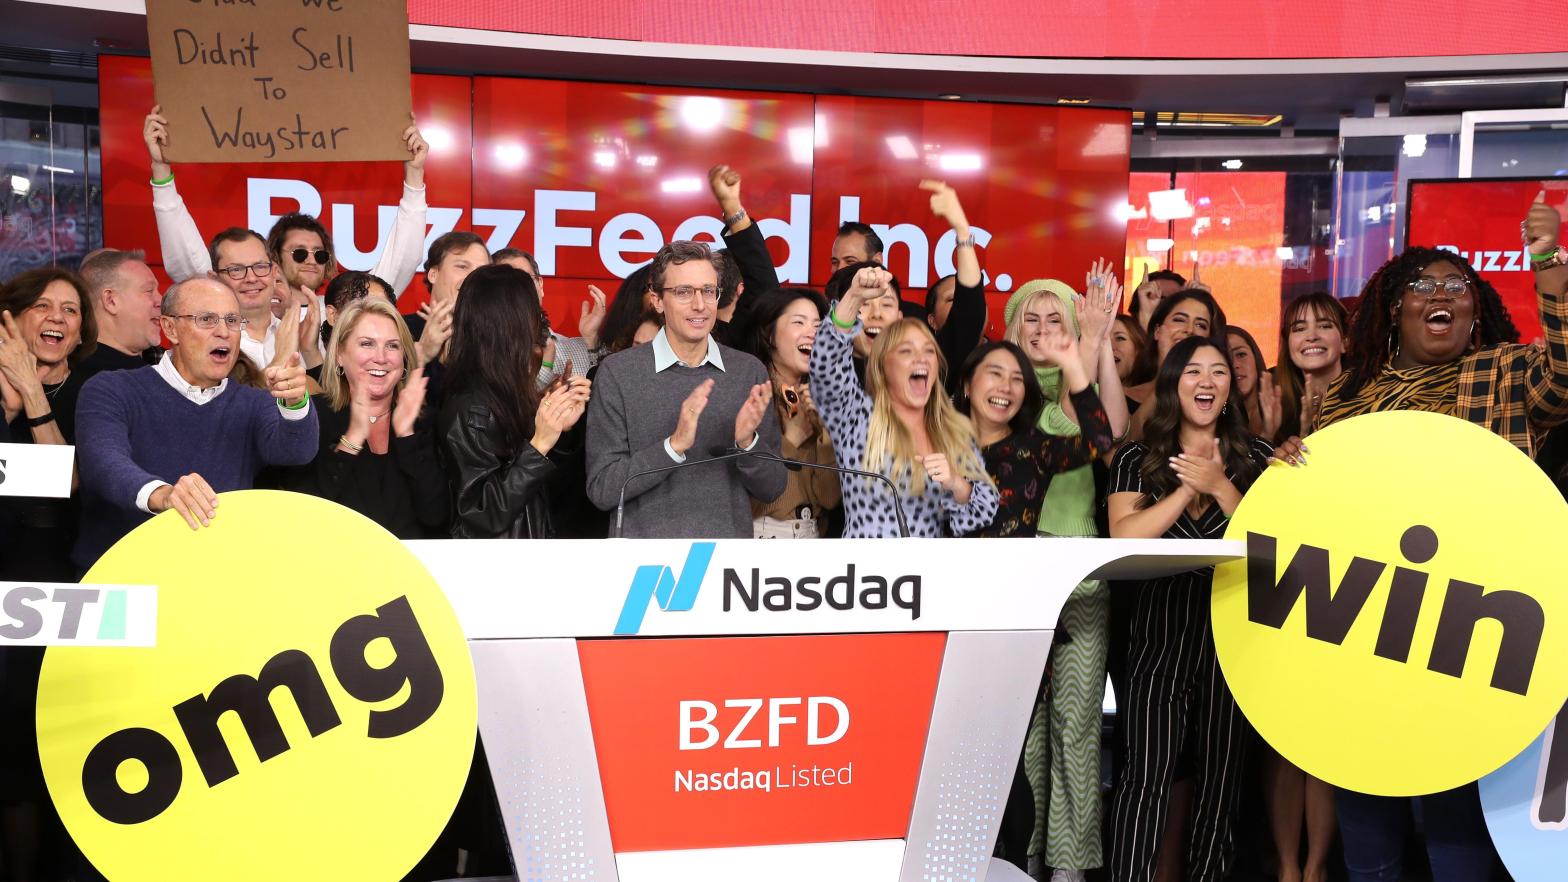 BuzzFeed went public in December 2021, though like many tech and media companies it conducted layoffs just a year later. CEO Jonah Peretti, centre, has talked about the need to cut costs and shift toward 'longer term trends' like AI. (Photo: Bennett Raglin, Getty Images)